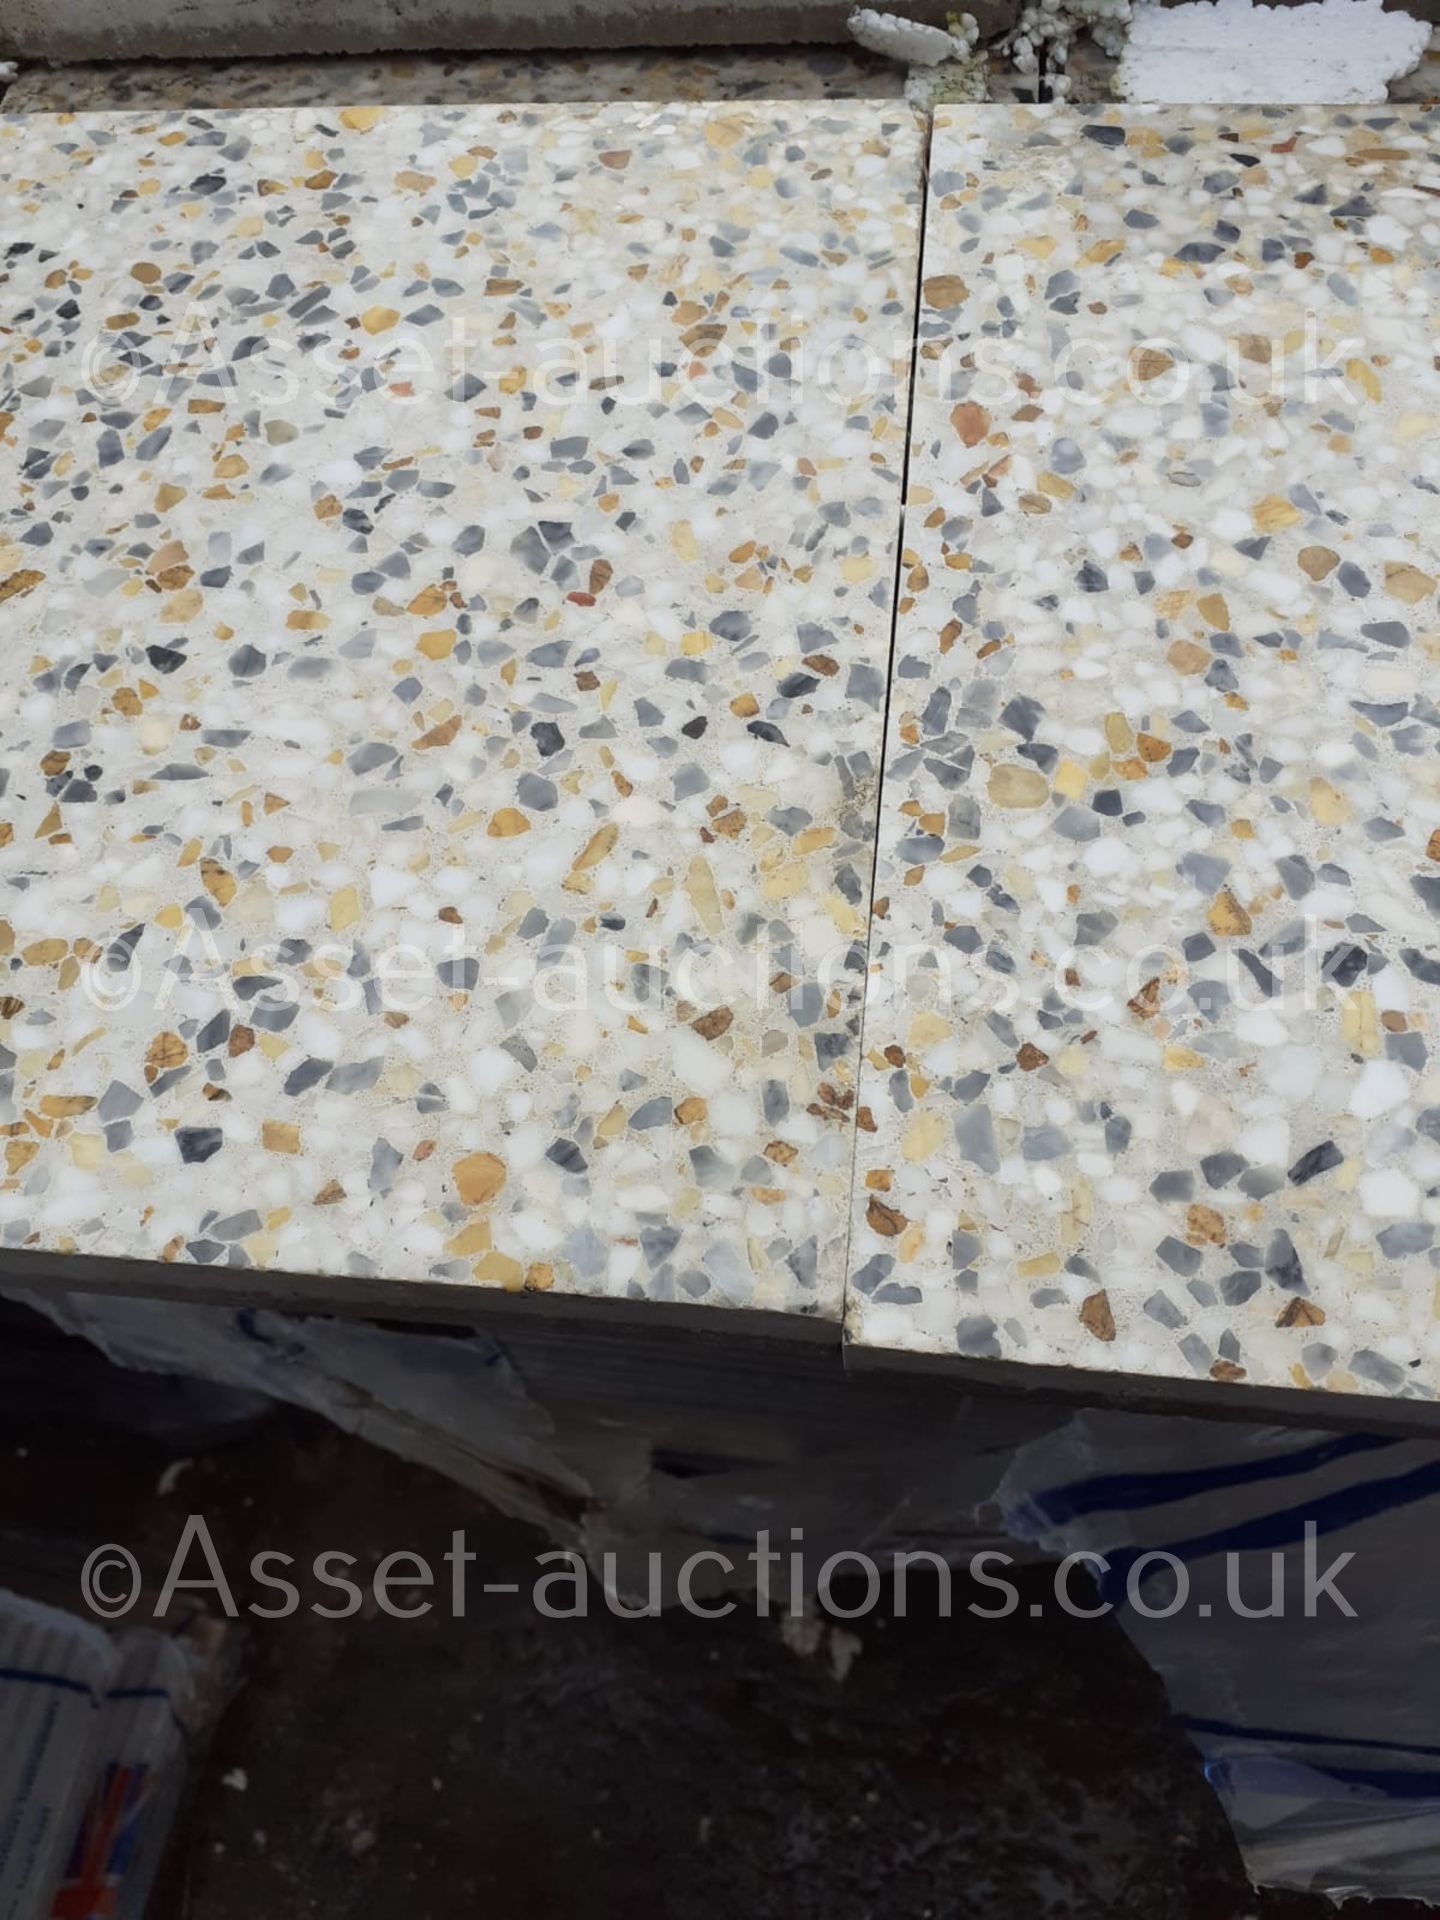 1 PALLET OF BRAND NEW TERRAZZO COMMERCIAL FLOOR TILES (TDE9), COVERS 24 SQUARE YARDS *PLUS VAT* - Image 3 of 6